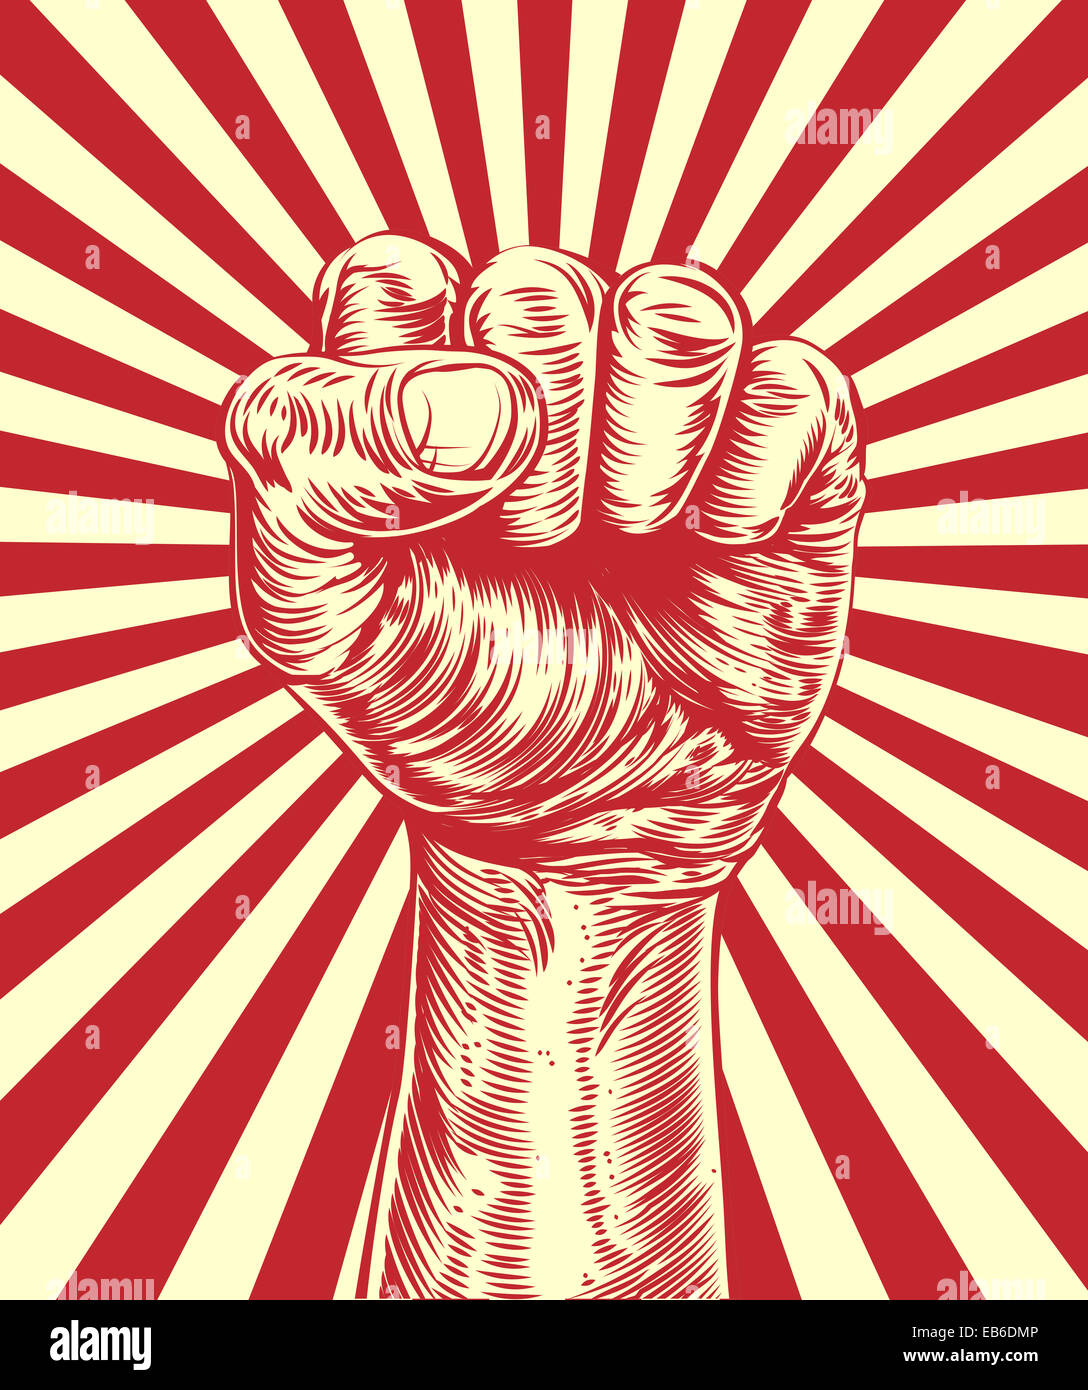 An original illustration of a revolutionary fist held in the air in a vintage wood cut propaganda style Stock Photo